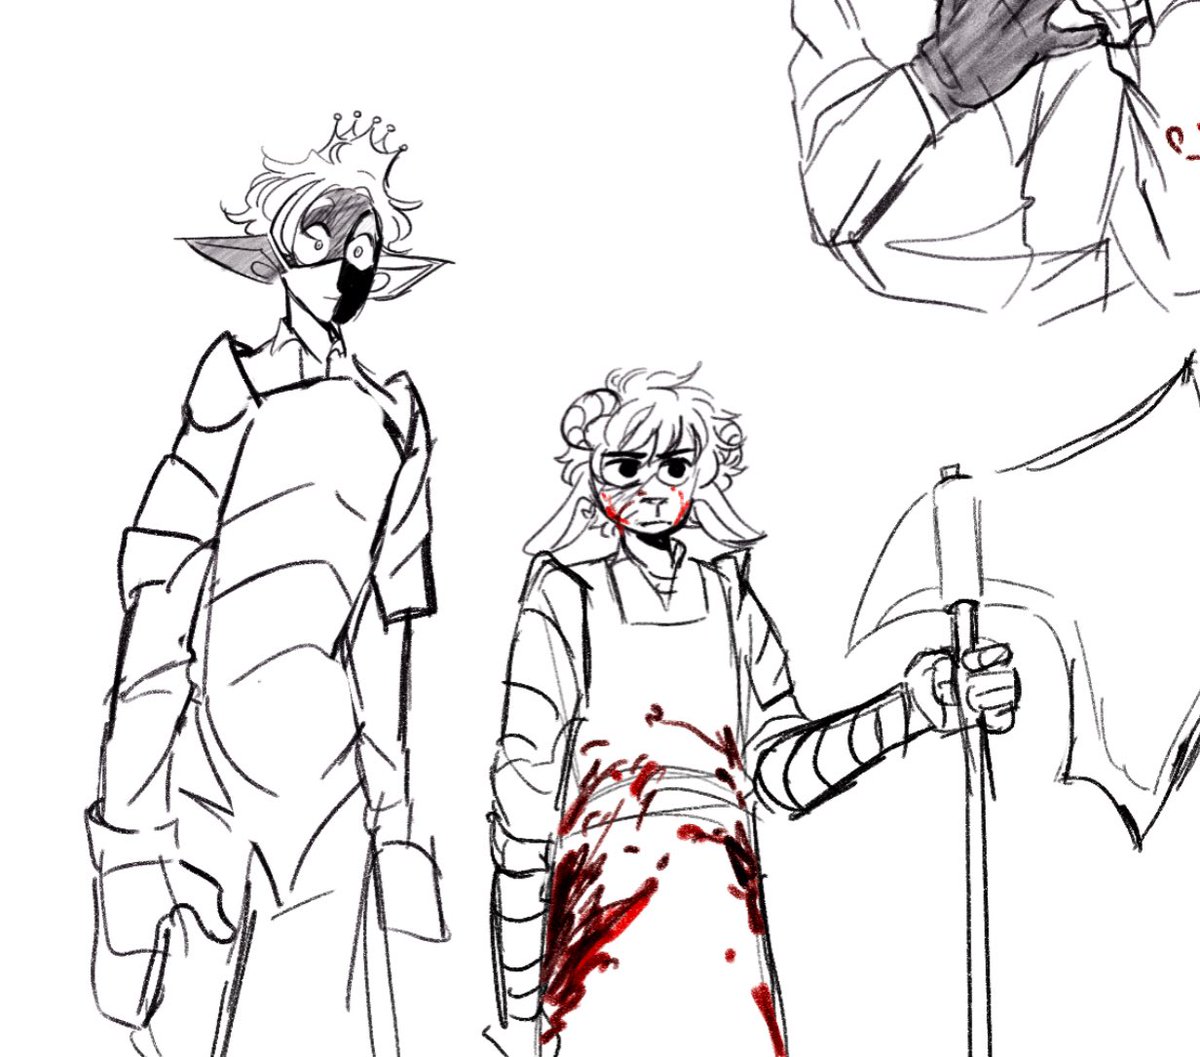 blood //
sadist animatic inspired doodles because I dont wanna have an art block lol 